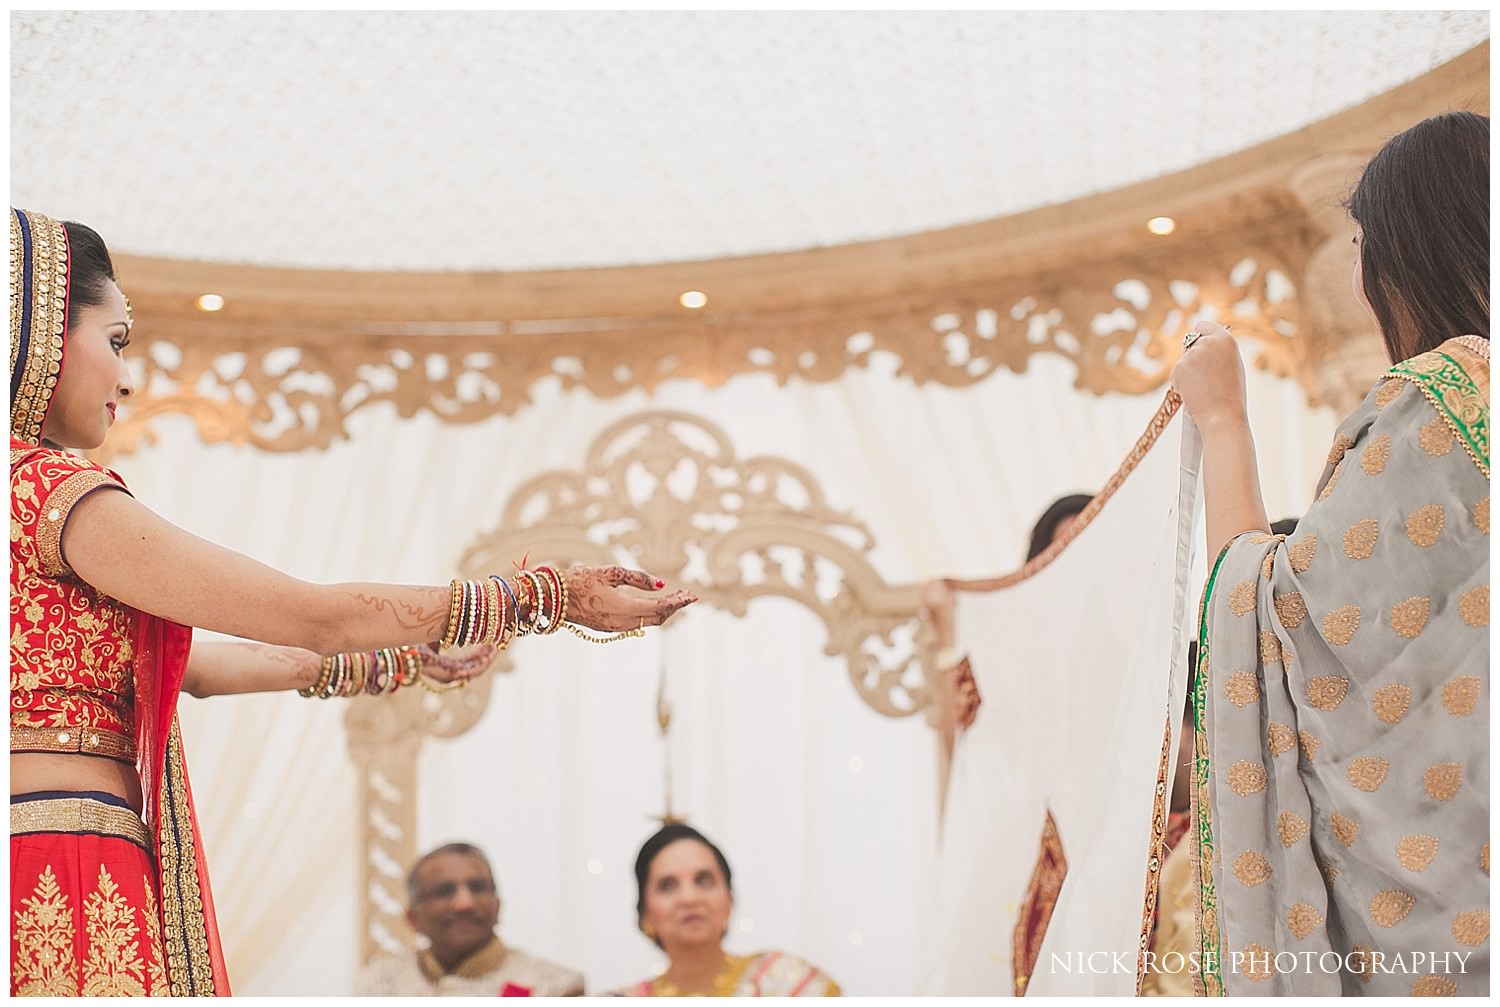  Bride ceremony reveal at East Wintergarden during a Hindu wedding in Canary Wharf London 